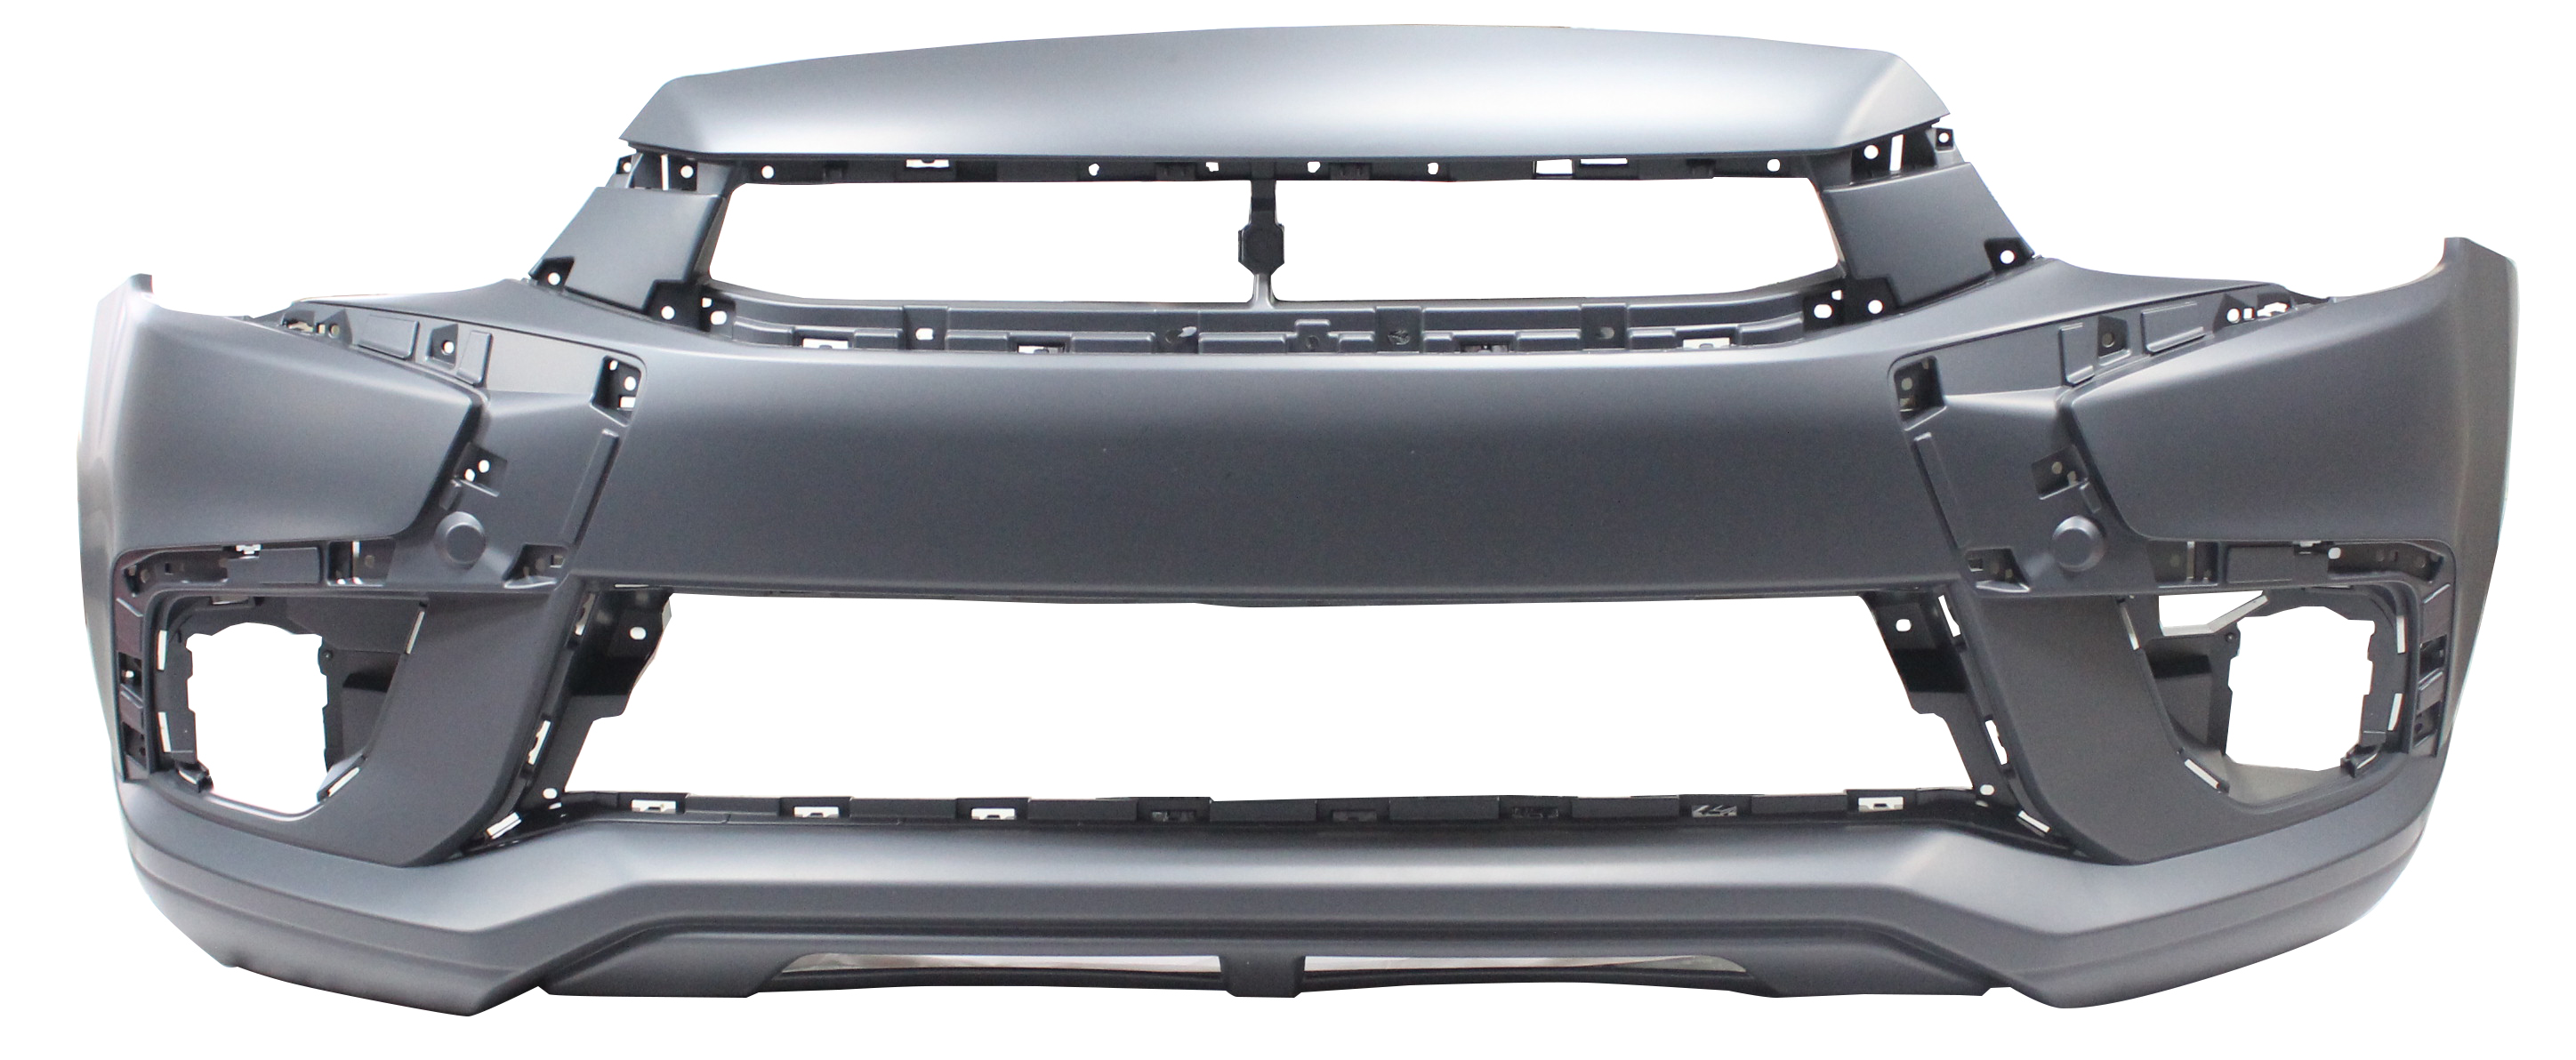 Aftermarket BUMPER COVERS for MITSUBISHI - OUTLANDER SPORT, OUTLANDER SPORT,16-16,Front bumper cover